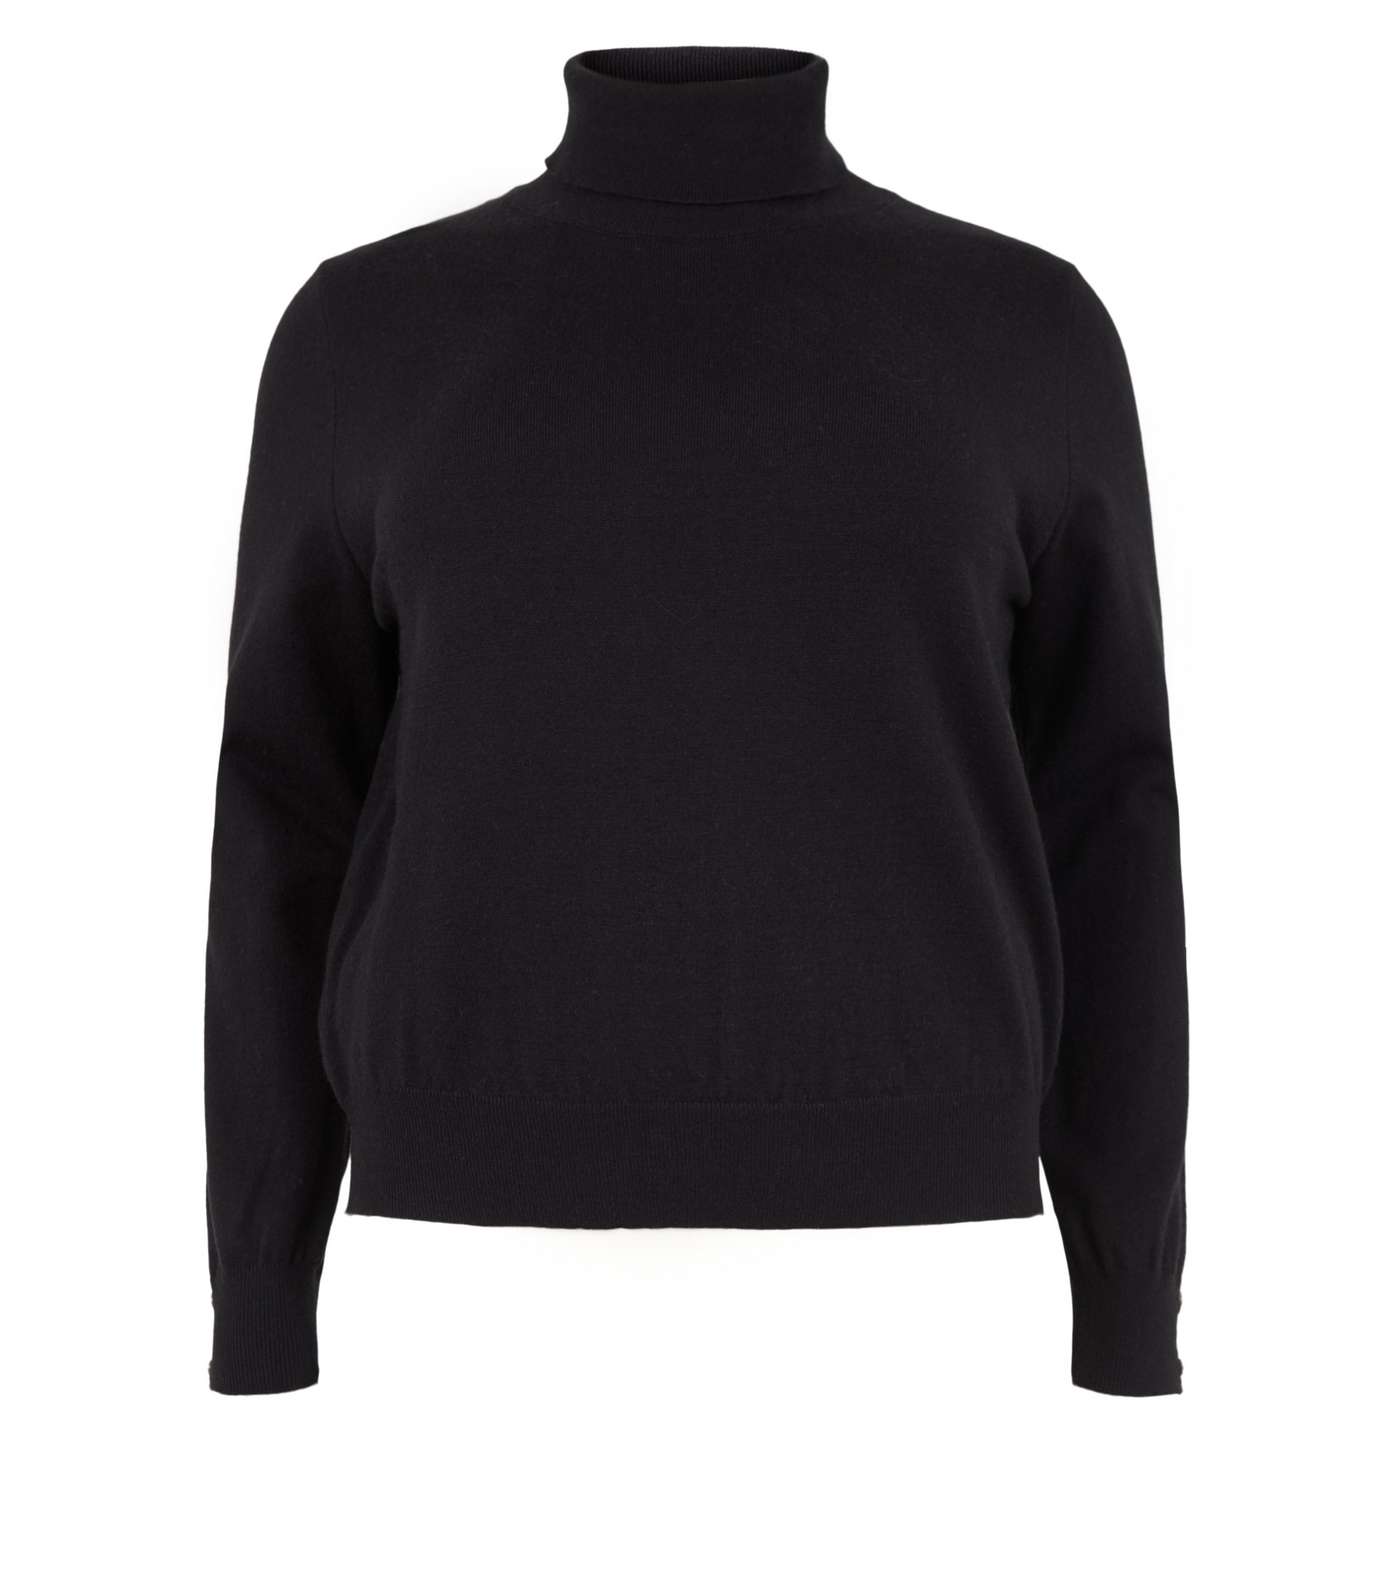 Apricot Curves Black Roll Neck Button Sleeve Jumper Image 4